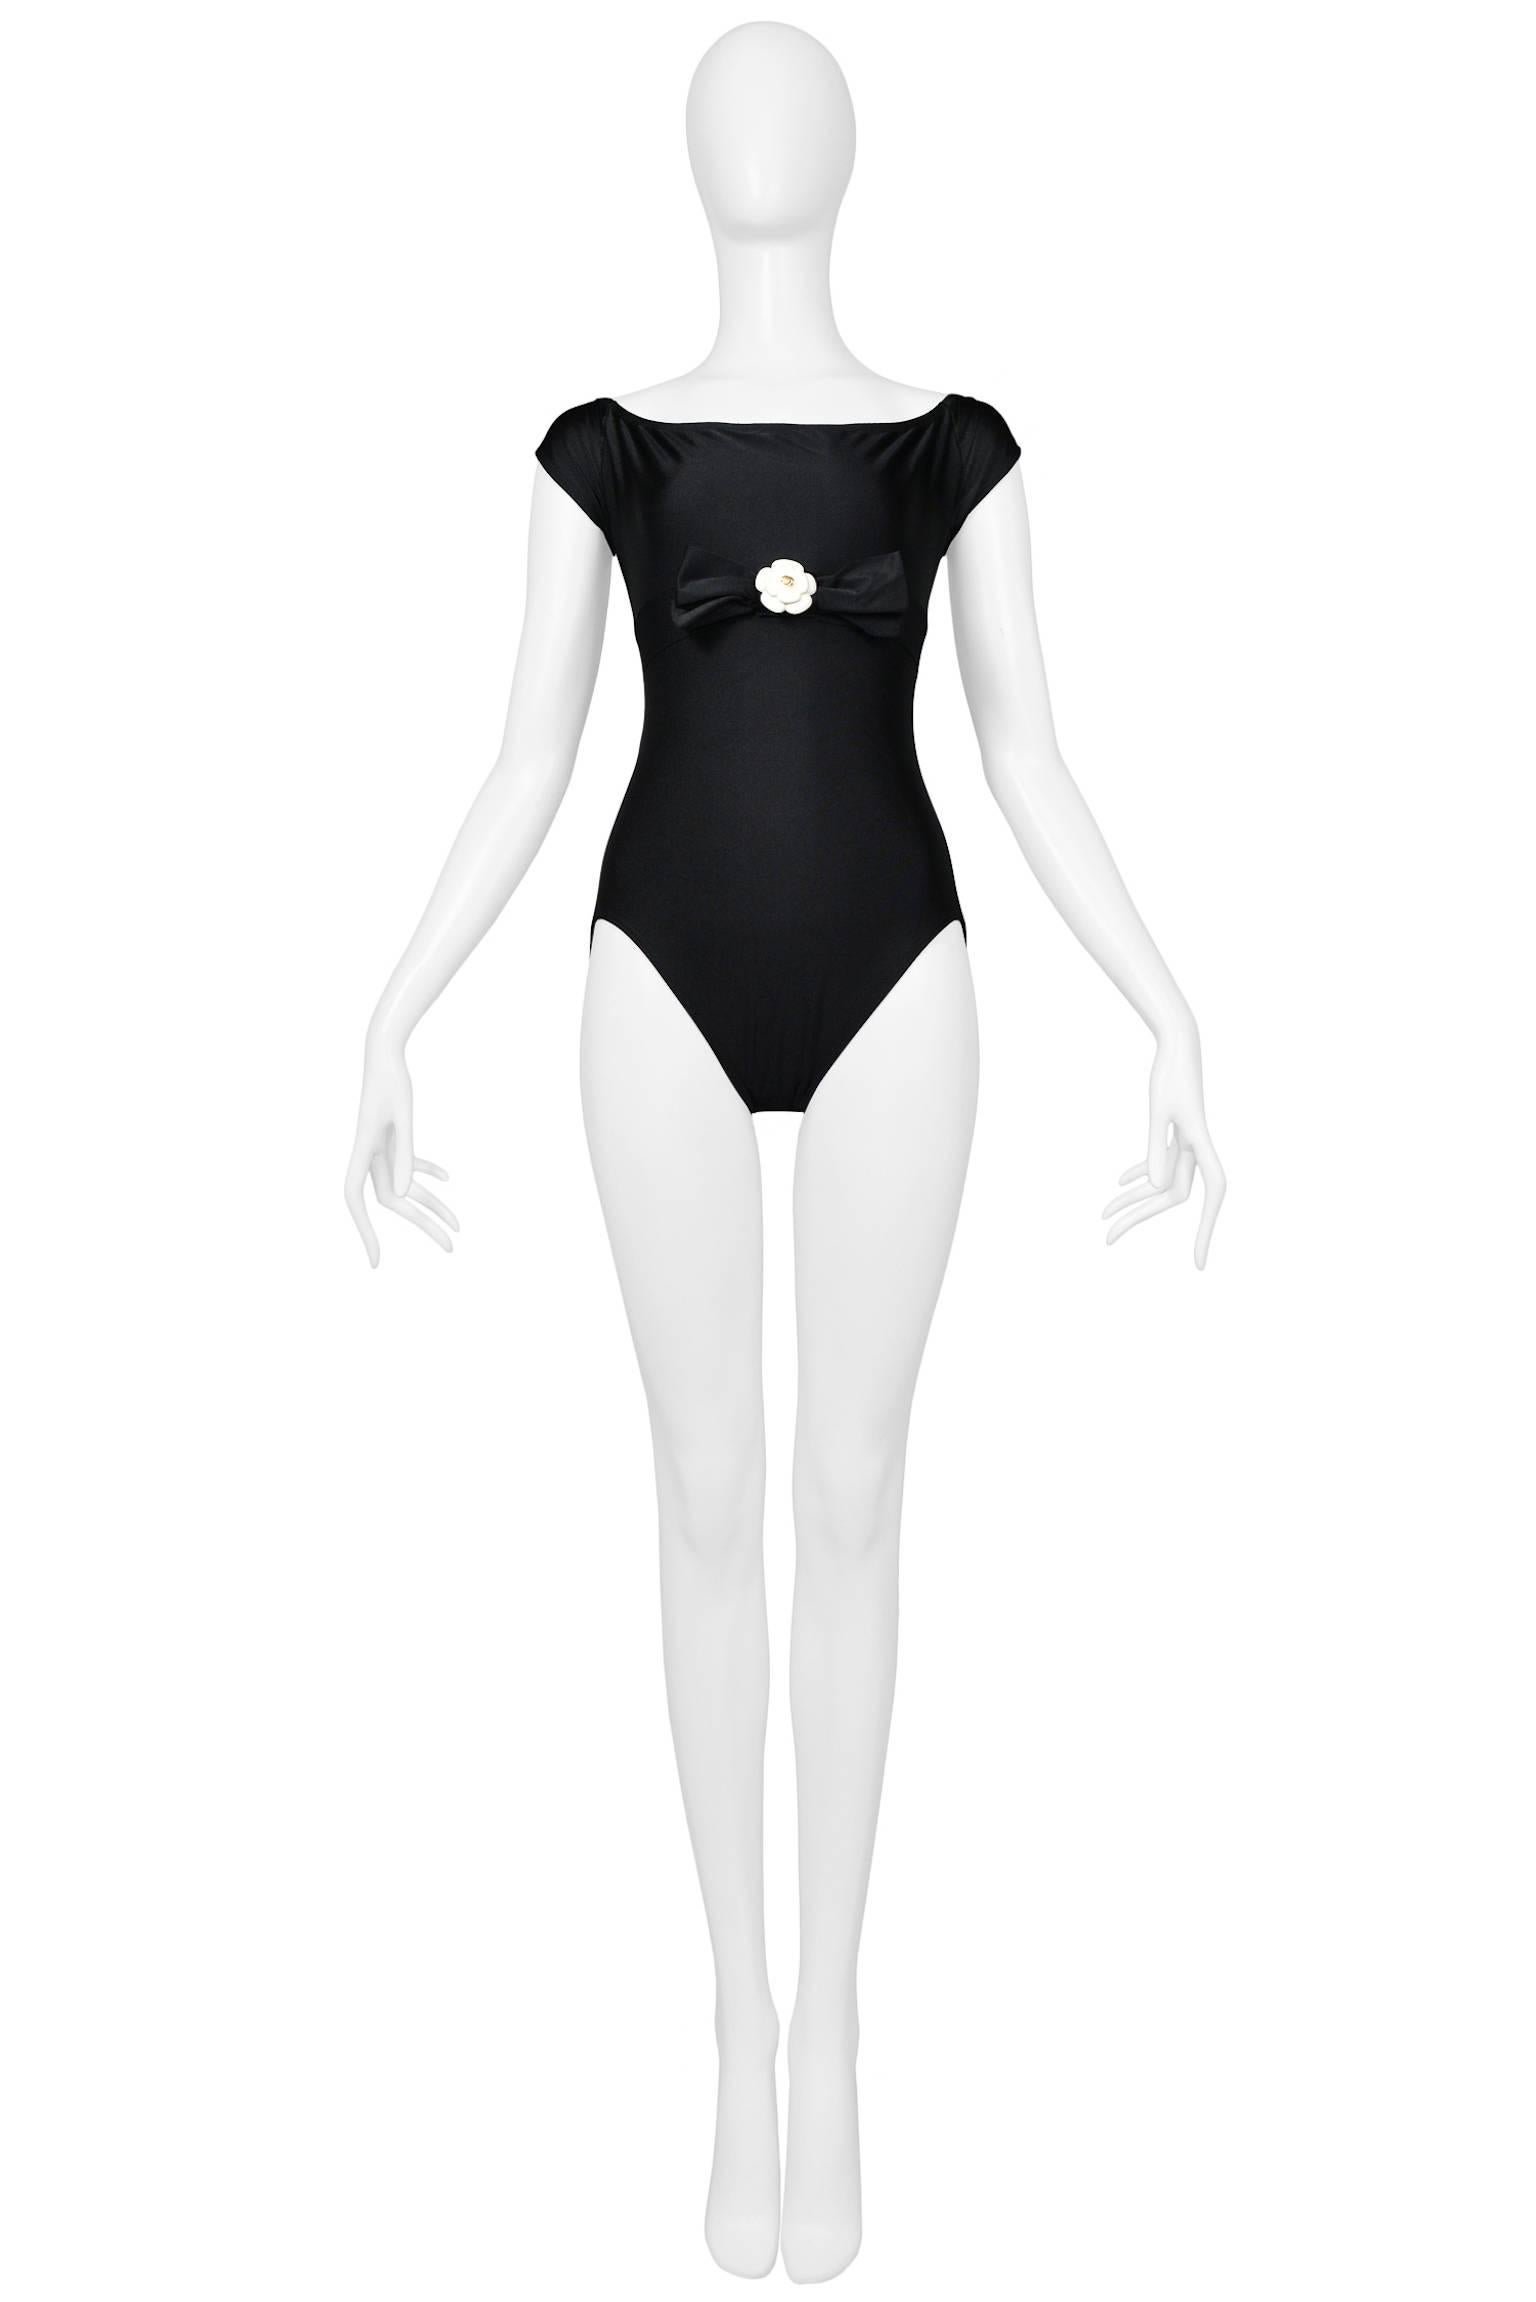 Vintage Chanel black bodysuit or swimsuit with black satin bow and cast or molded sculptural plastic off white 